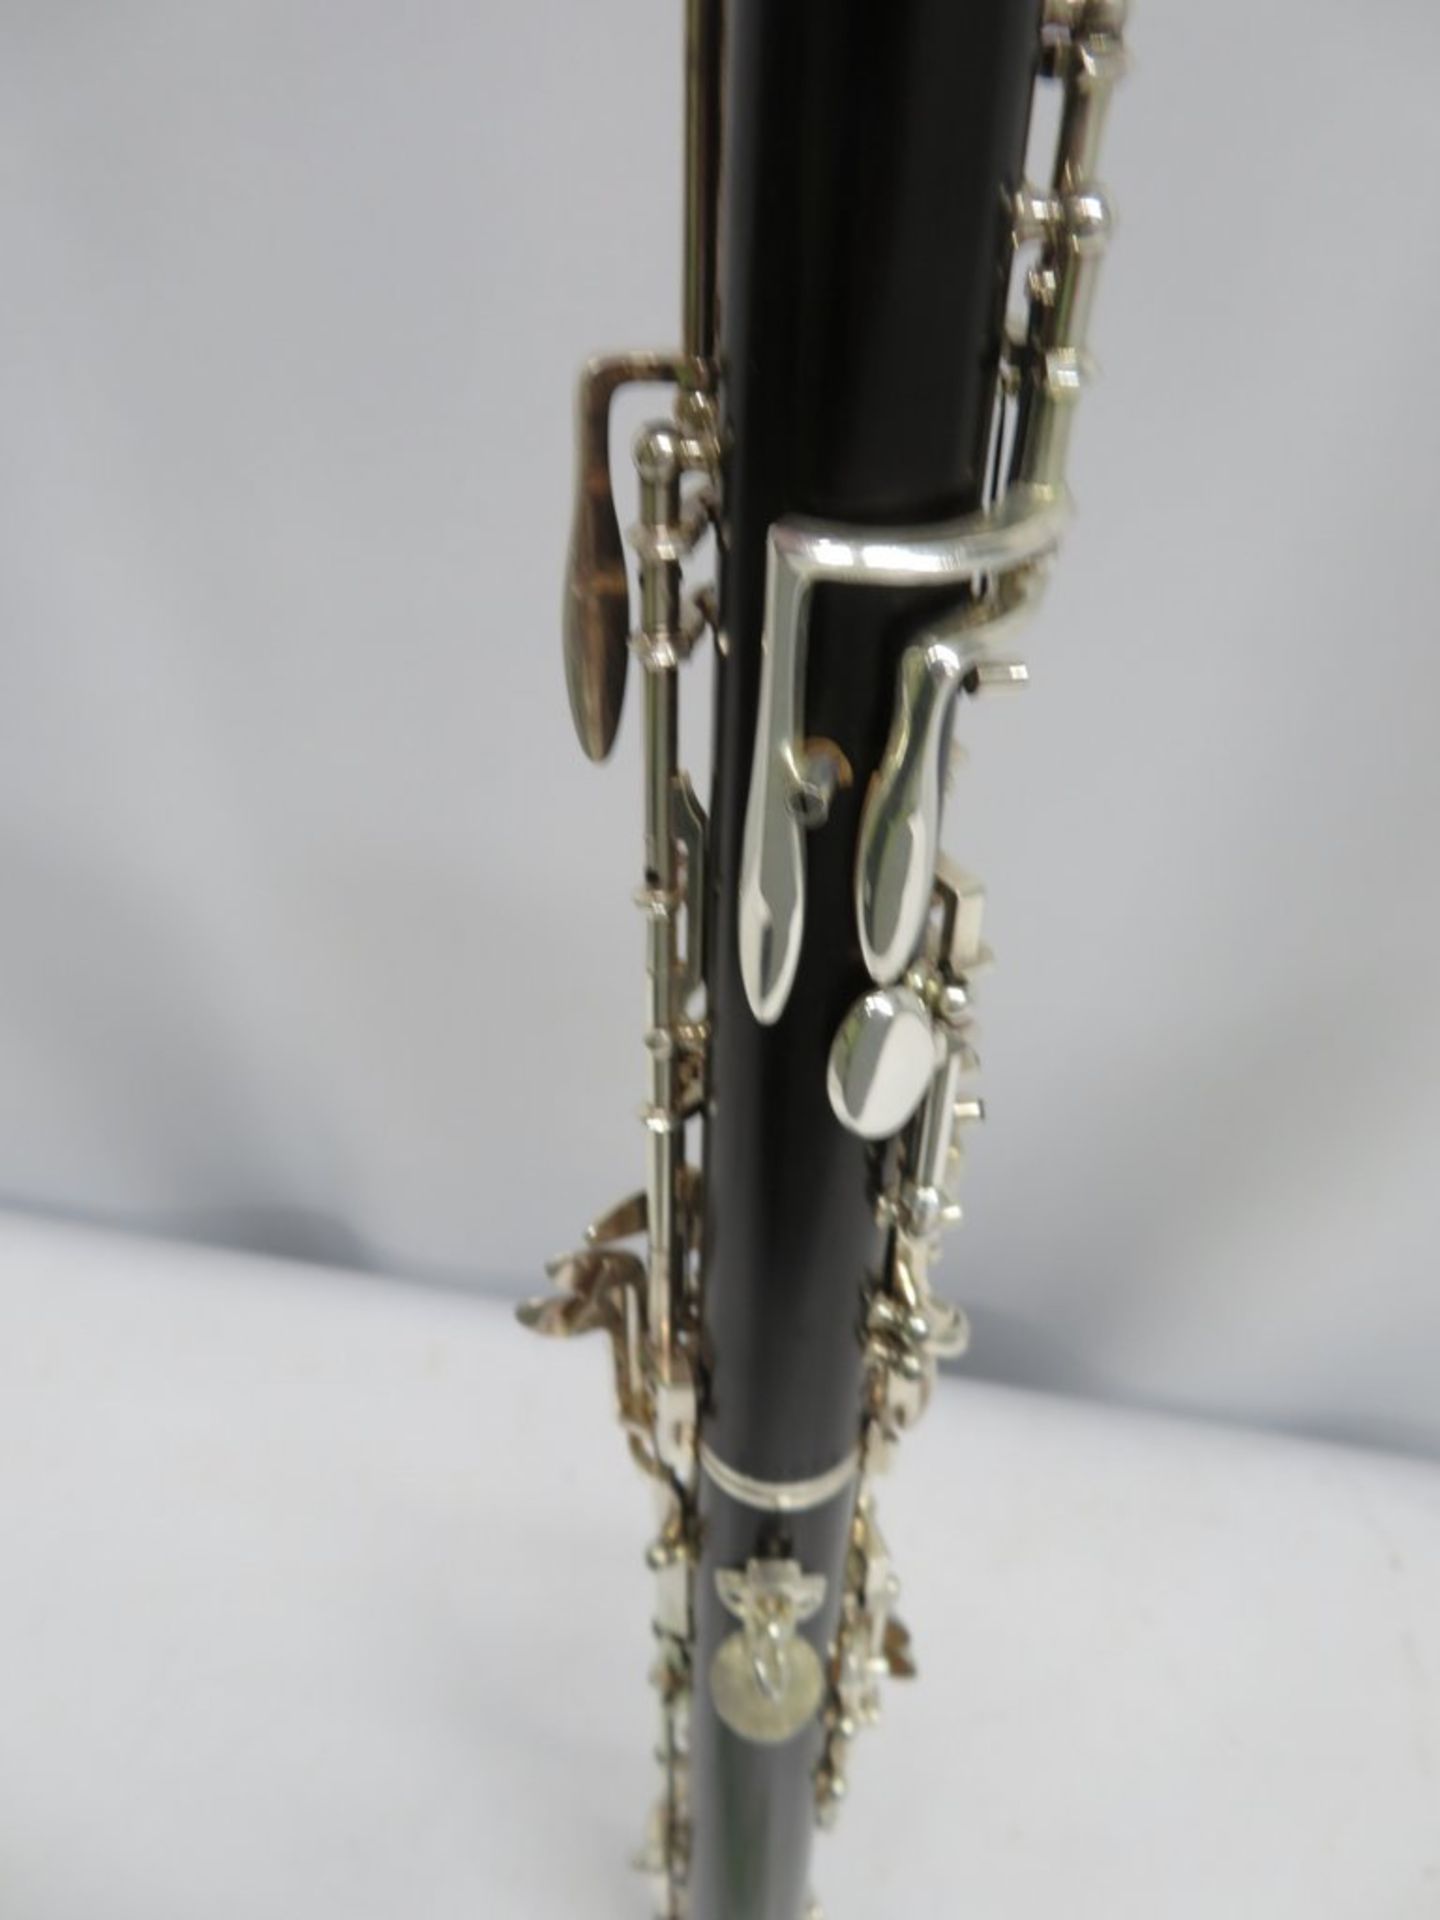 Buffet Green Line BC Oboe With Case. Serial Number: G11814. Please Note That This Item Has - Image 14 of 15